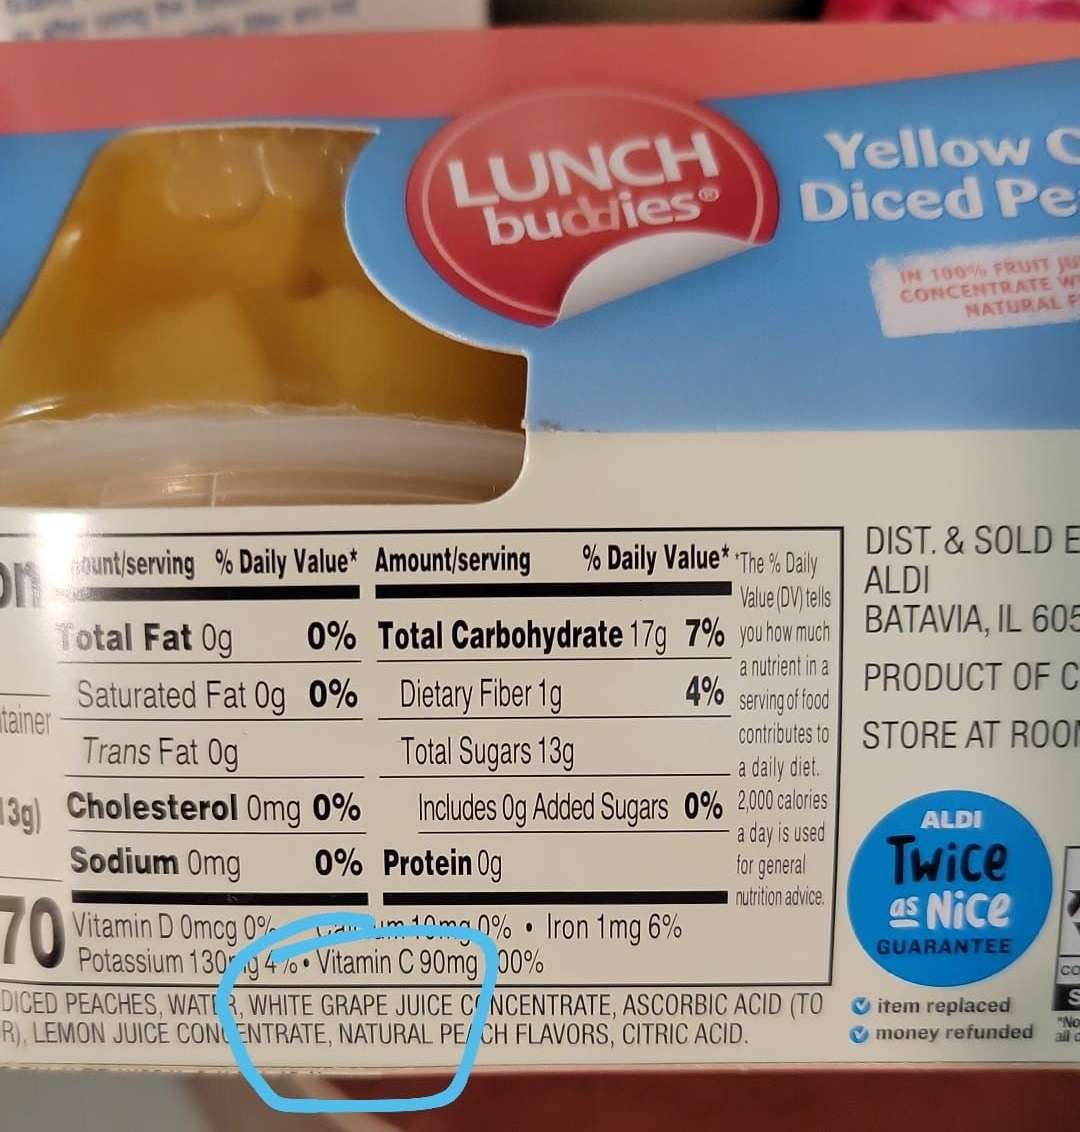 Kosher Alert: Aldi's Lunch Lunch Buddies Fruit Bowls Unauthorized Use Of Star-K Symbol ingredients contains white grape juice